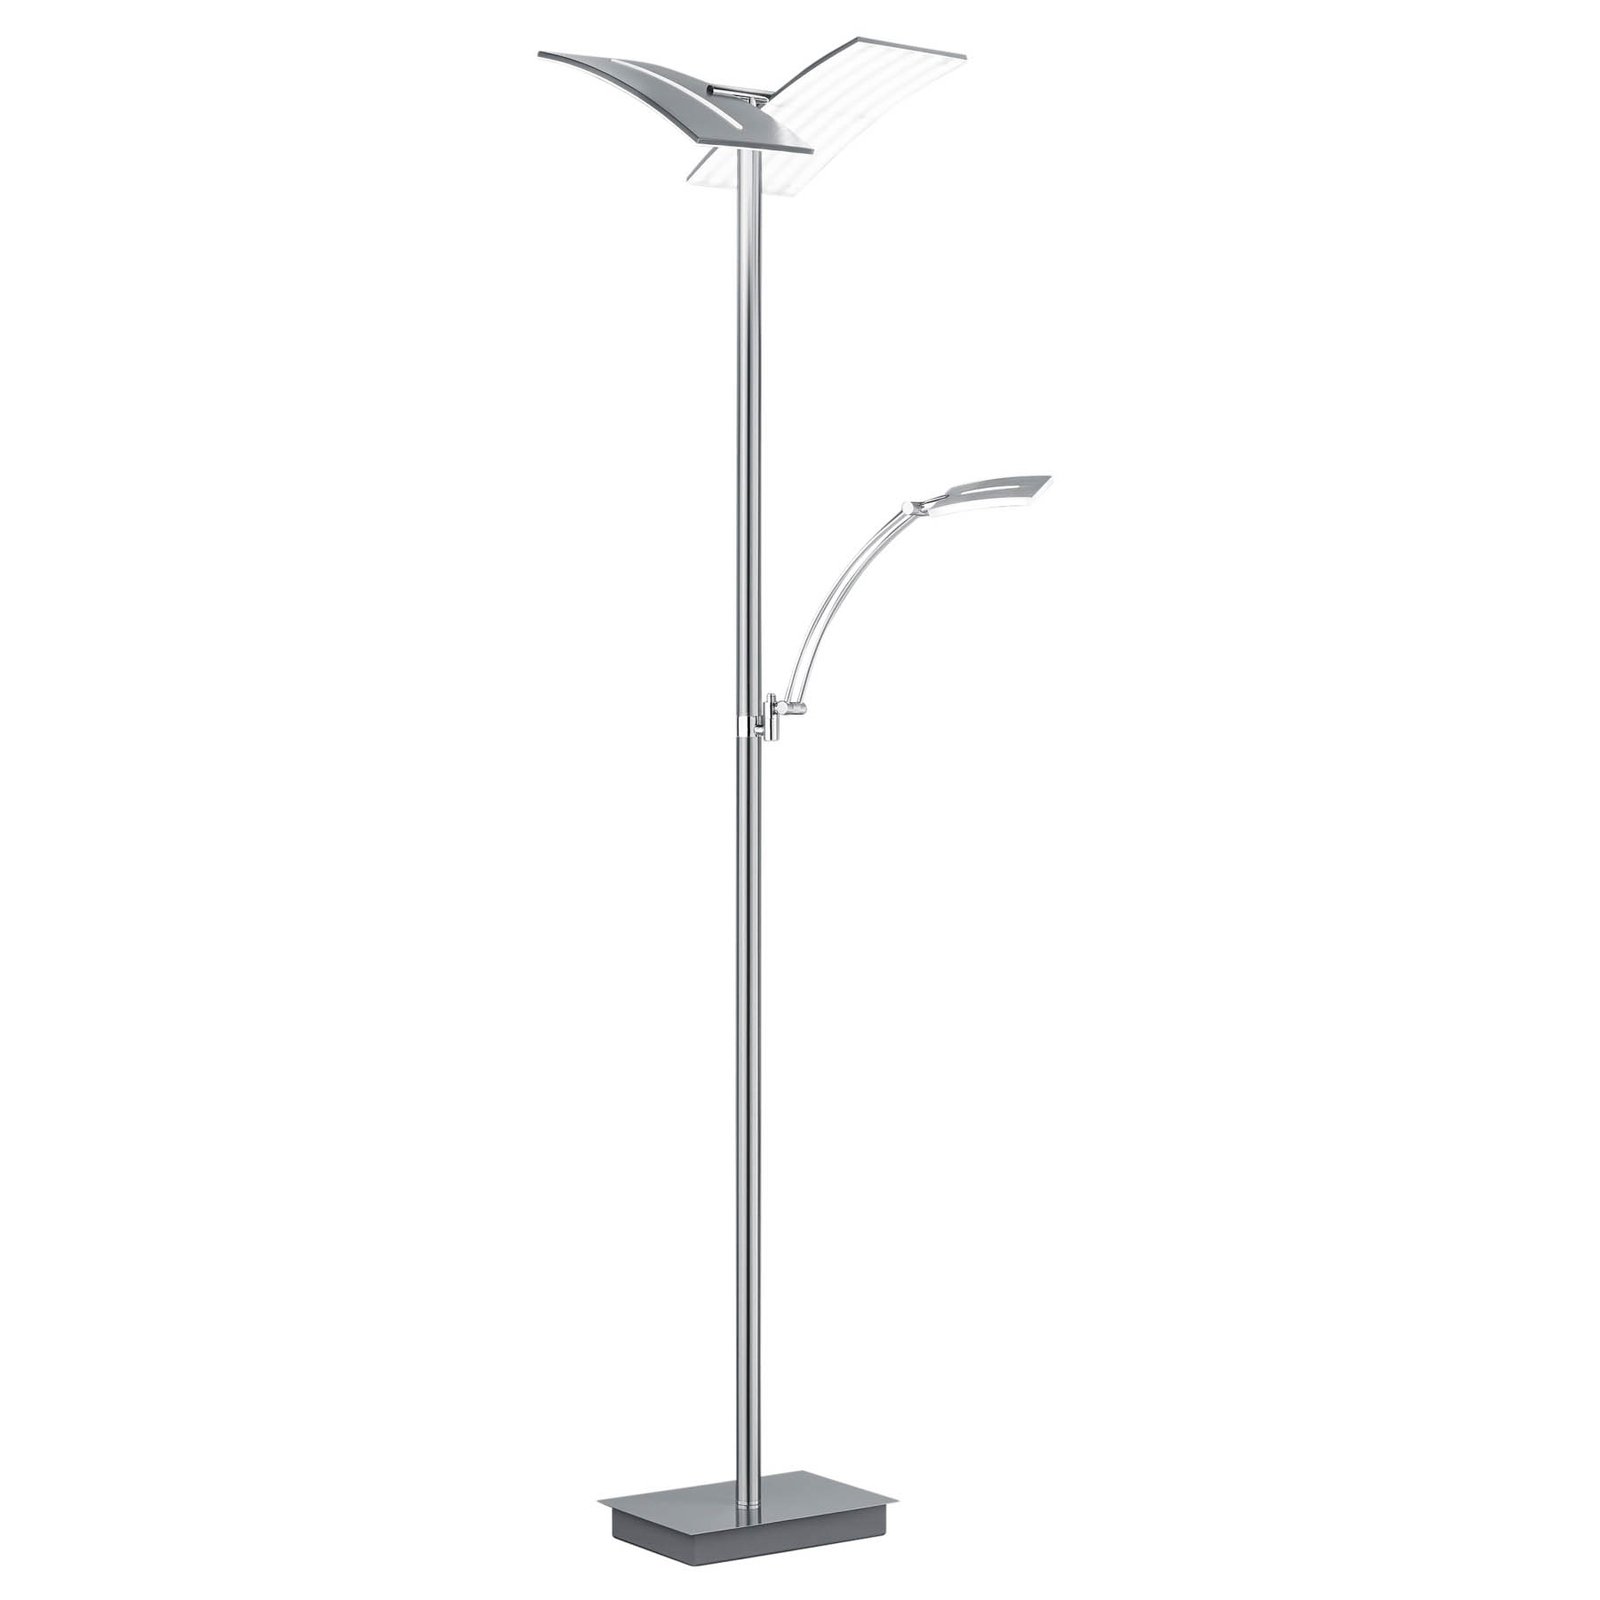 Dual LED floor lamp with a reading light, nickel